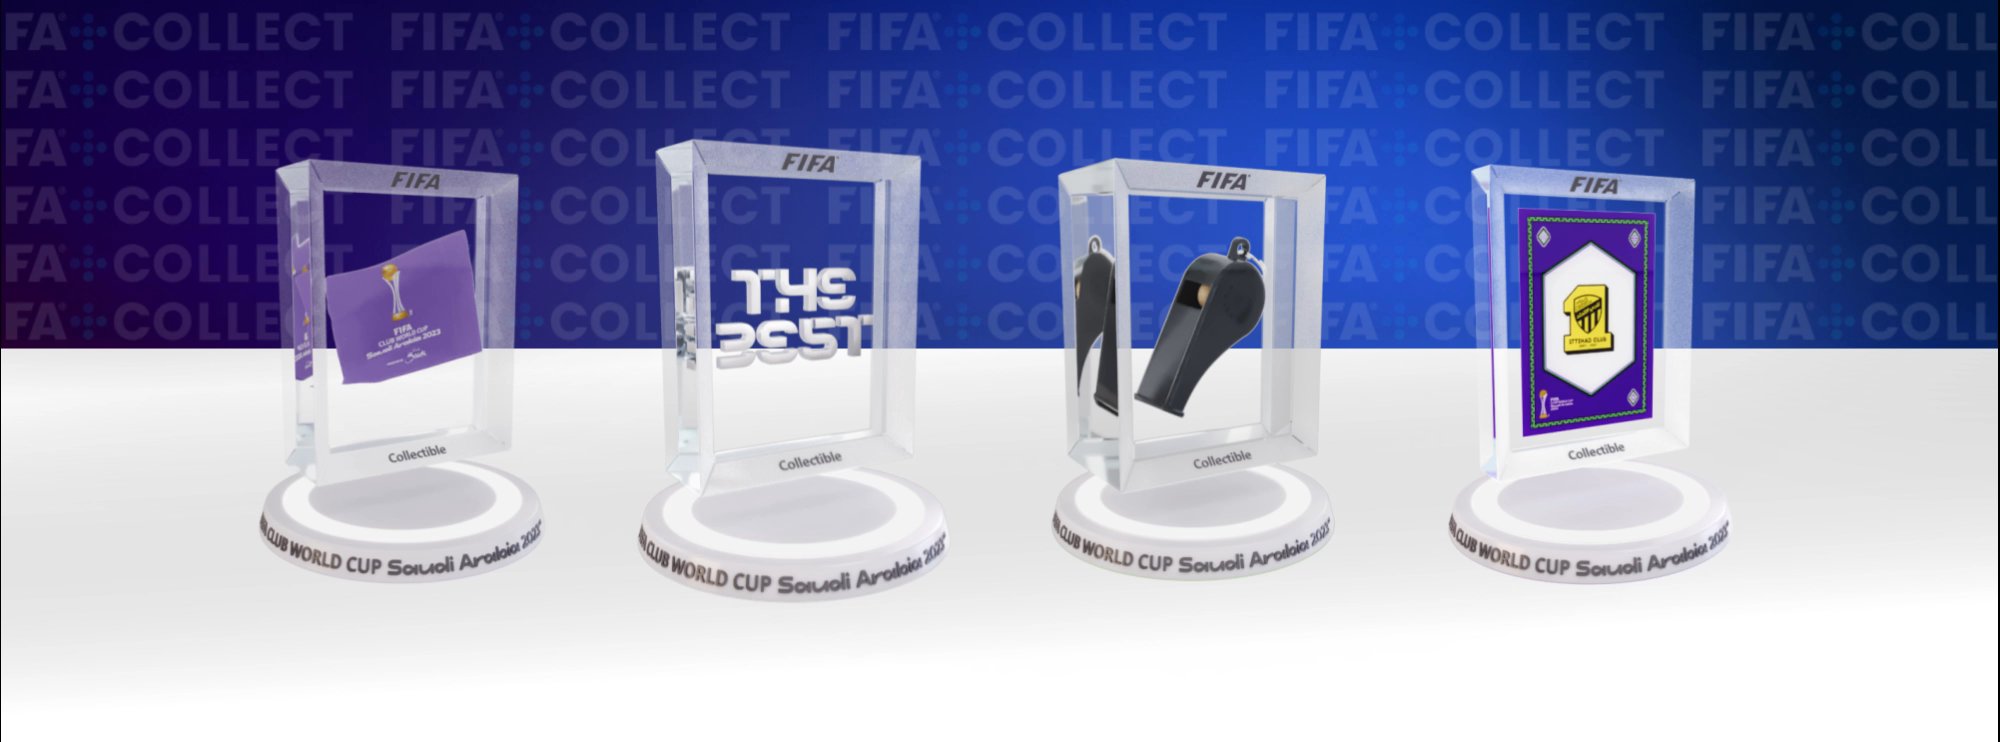 FIFA+ Collect - Collection